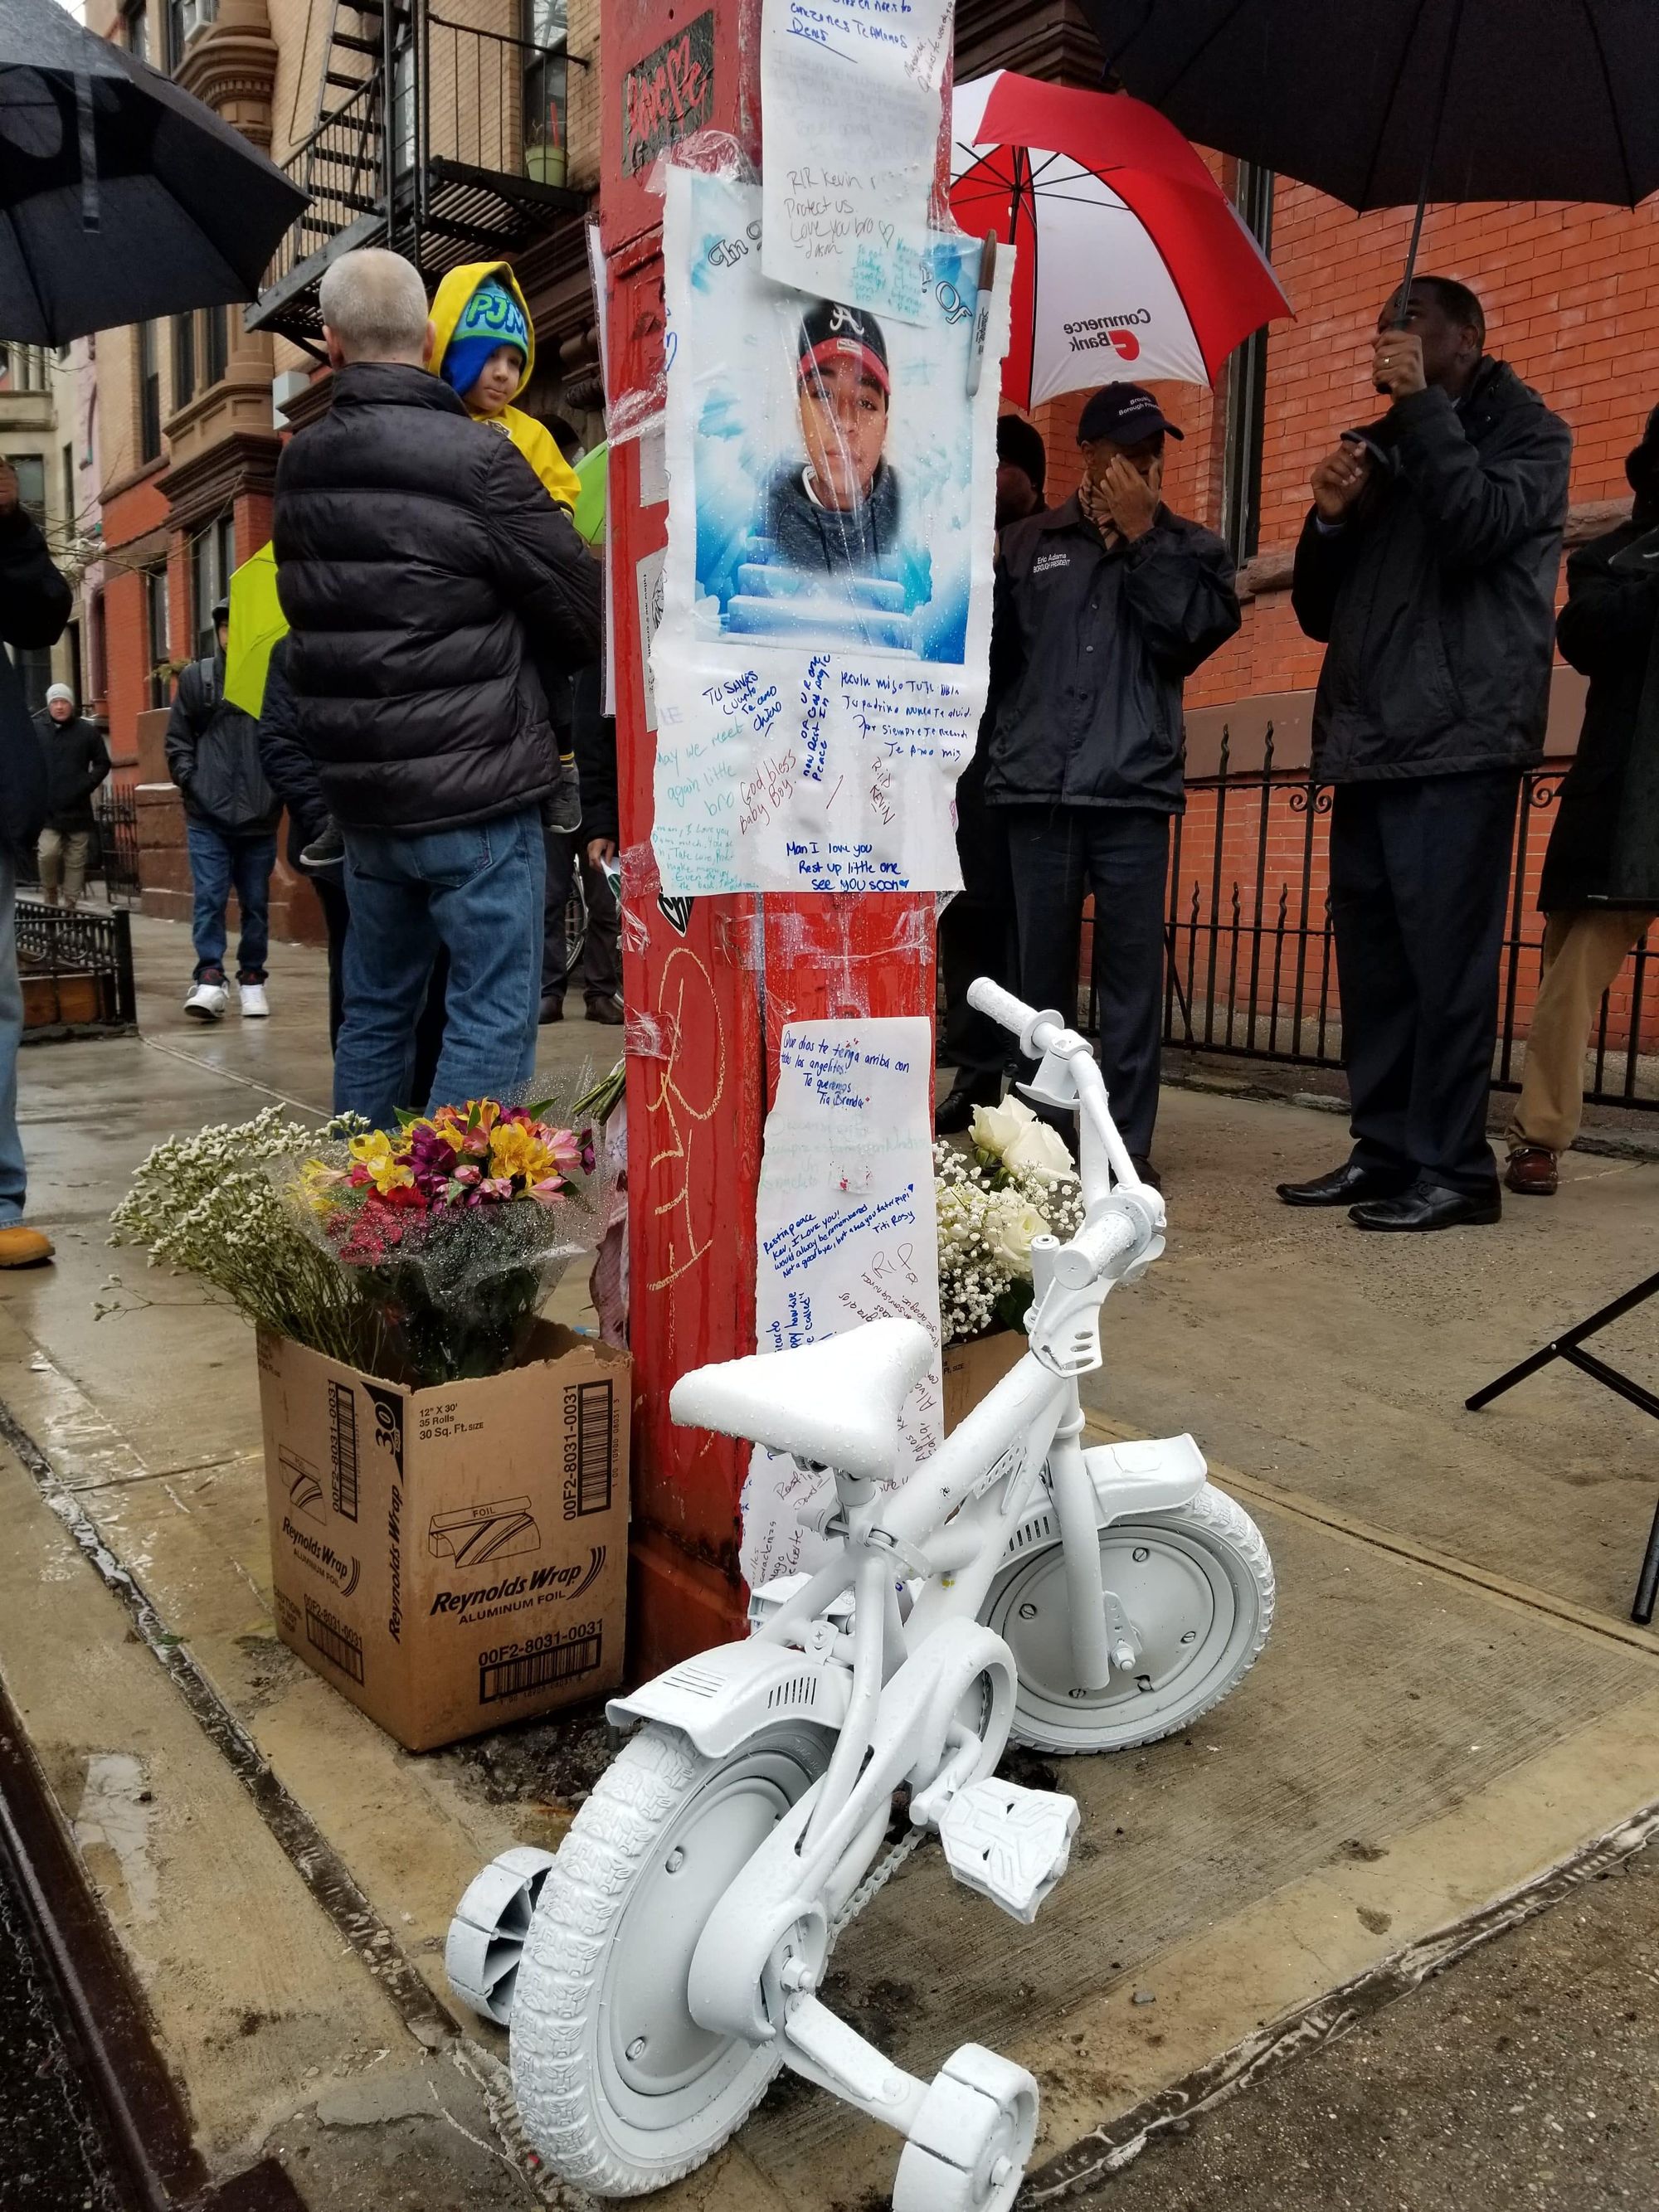 Dozens Gather To Support Family of 13-Year-Old Cyclist Killed By Truck In Bed-Stuy